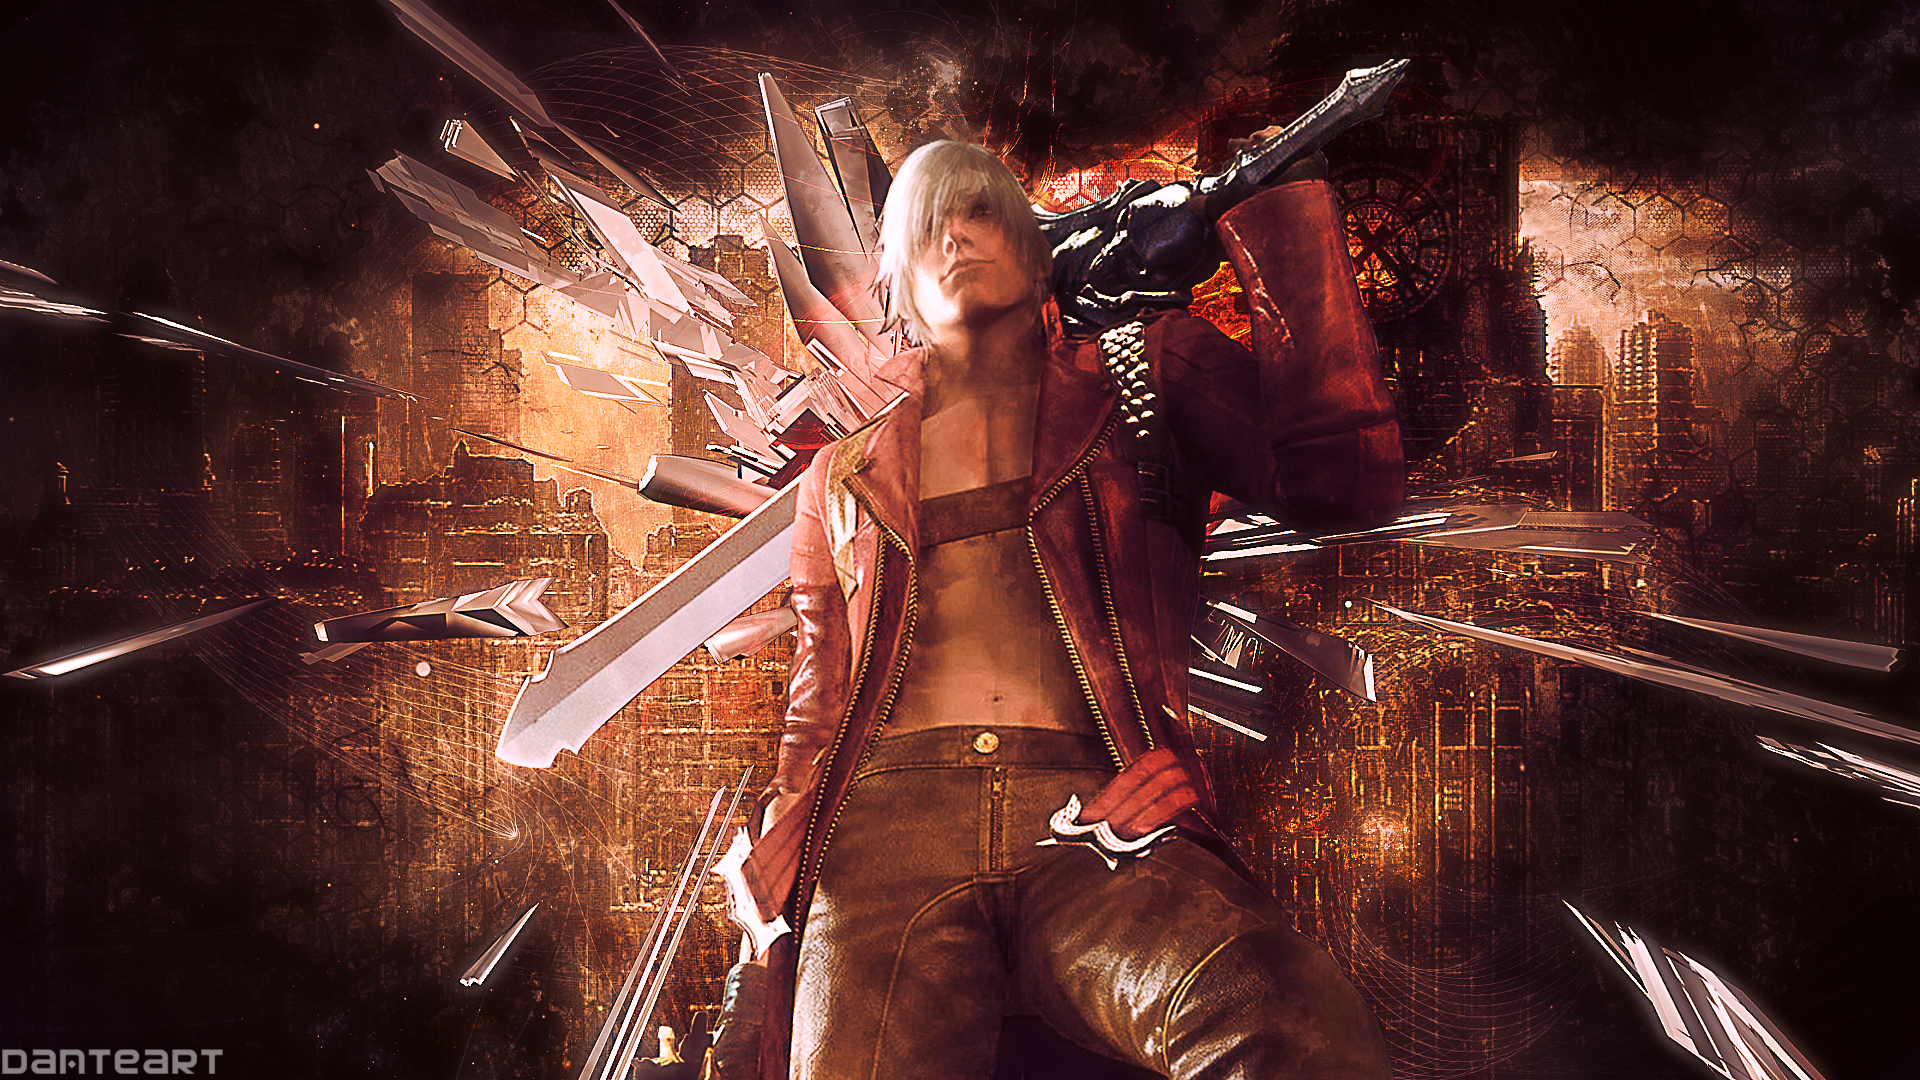 Dante Devil May Cry Wallpapers - Wallpaper Cave